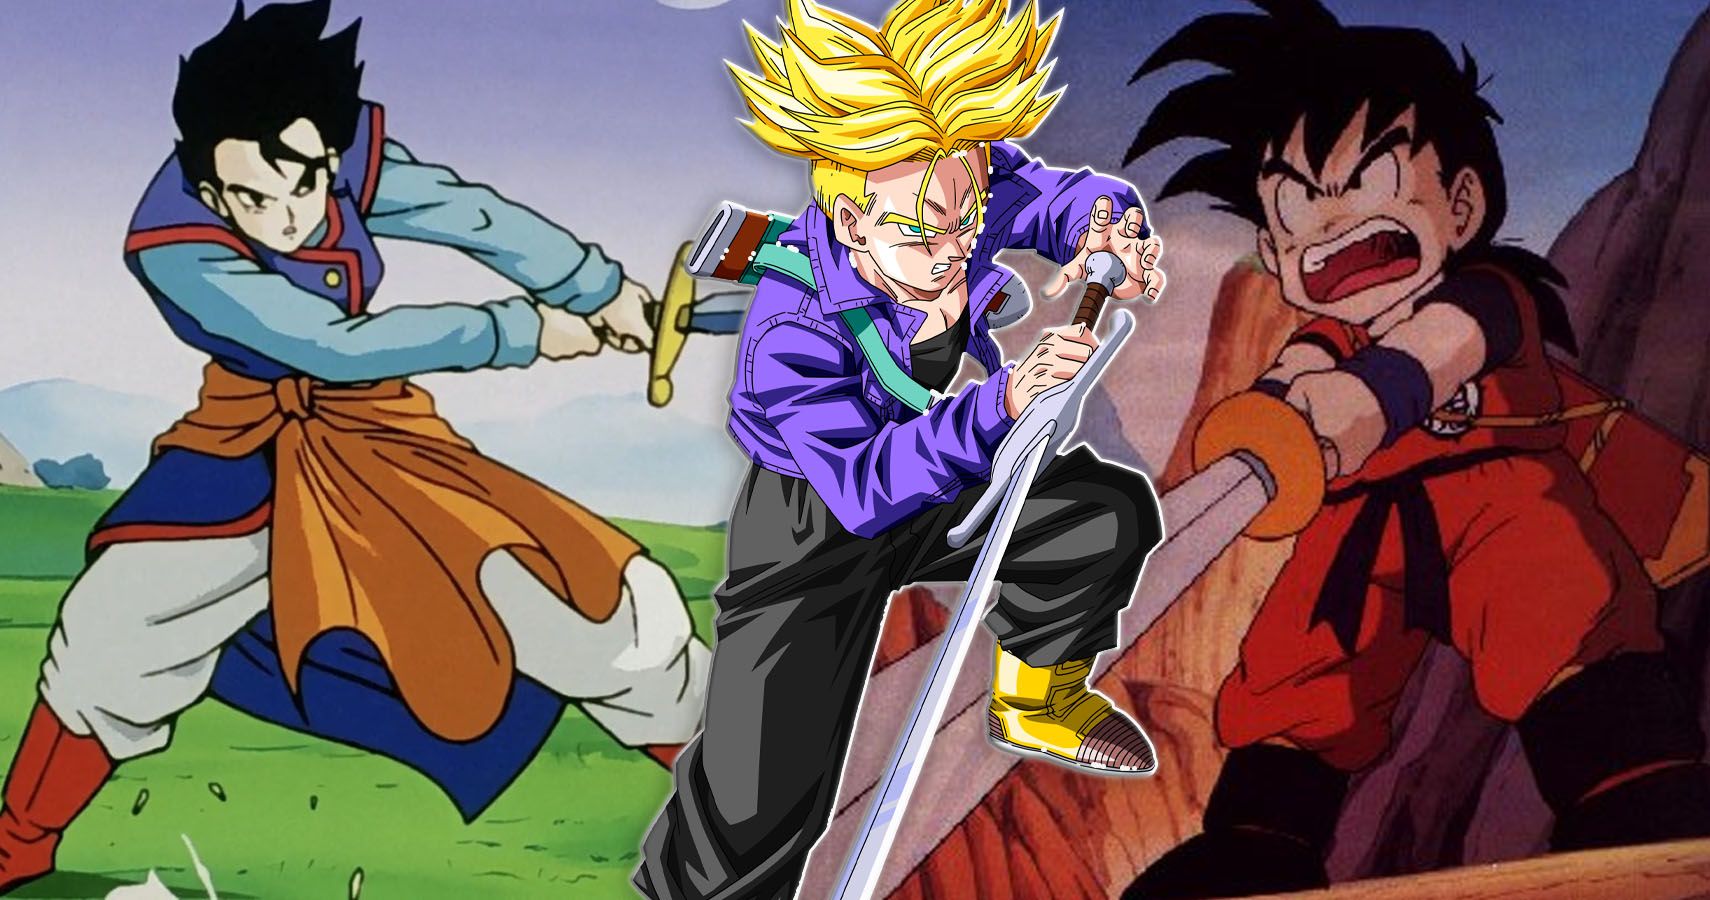 Super Saiyan Future Trunks overlaid on kid and adult Gohan all holding Swords from Dragon Ball Z